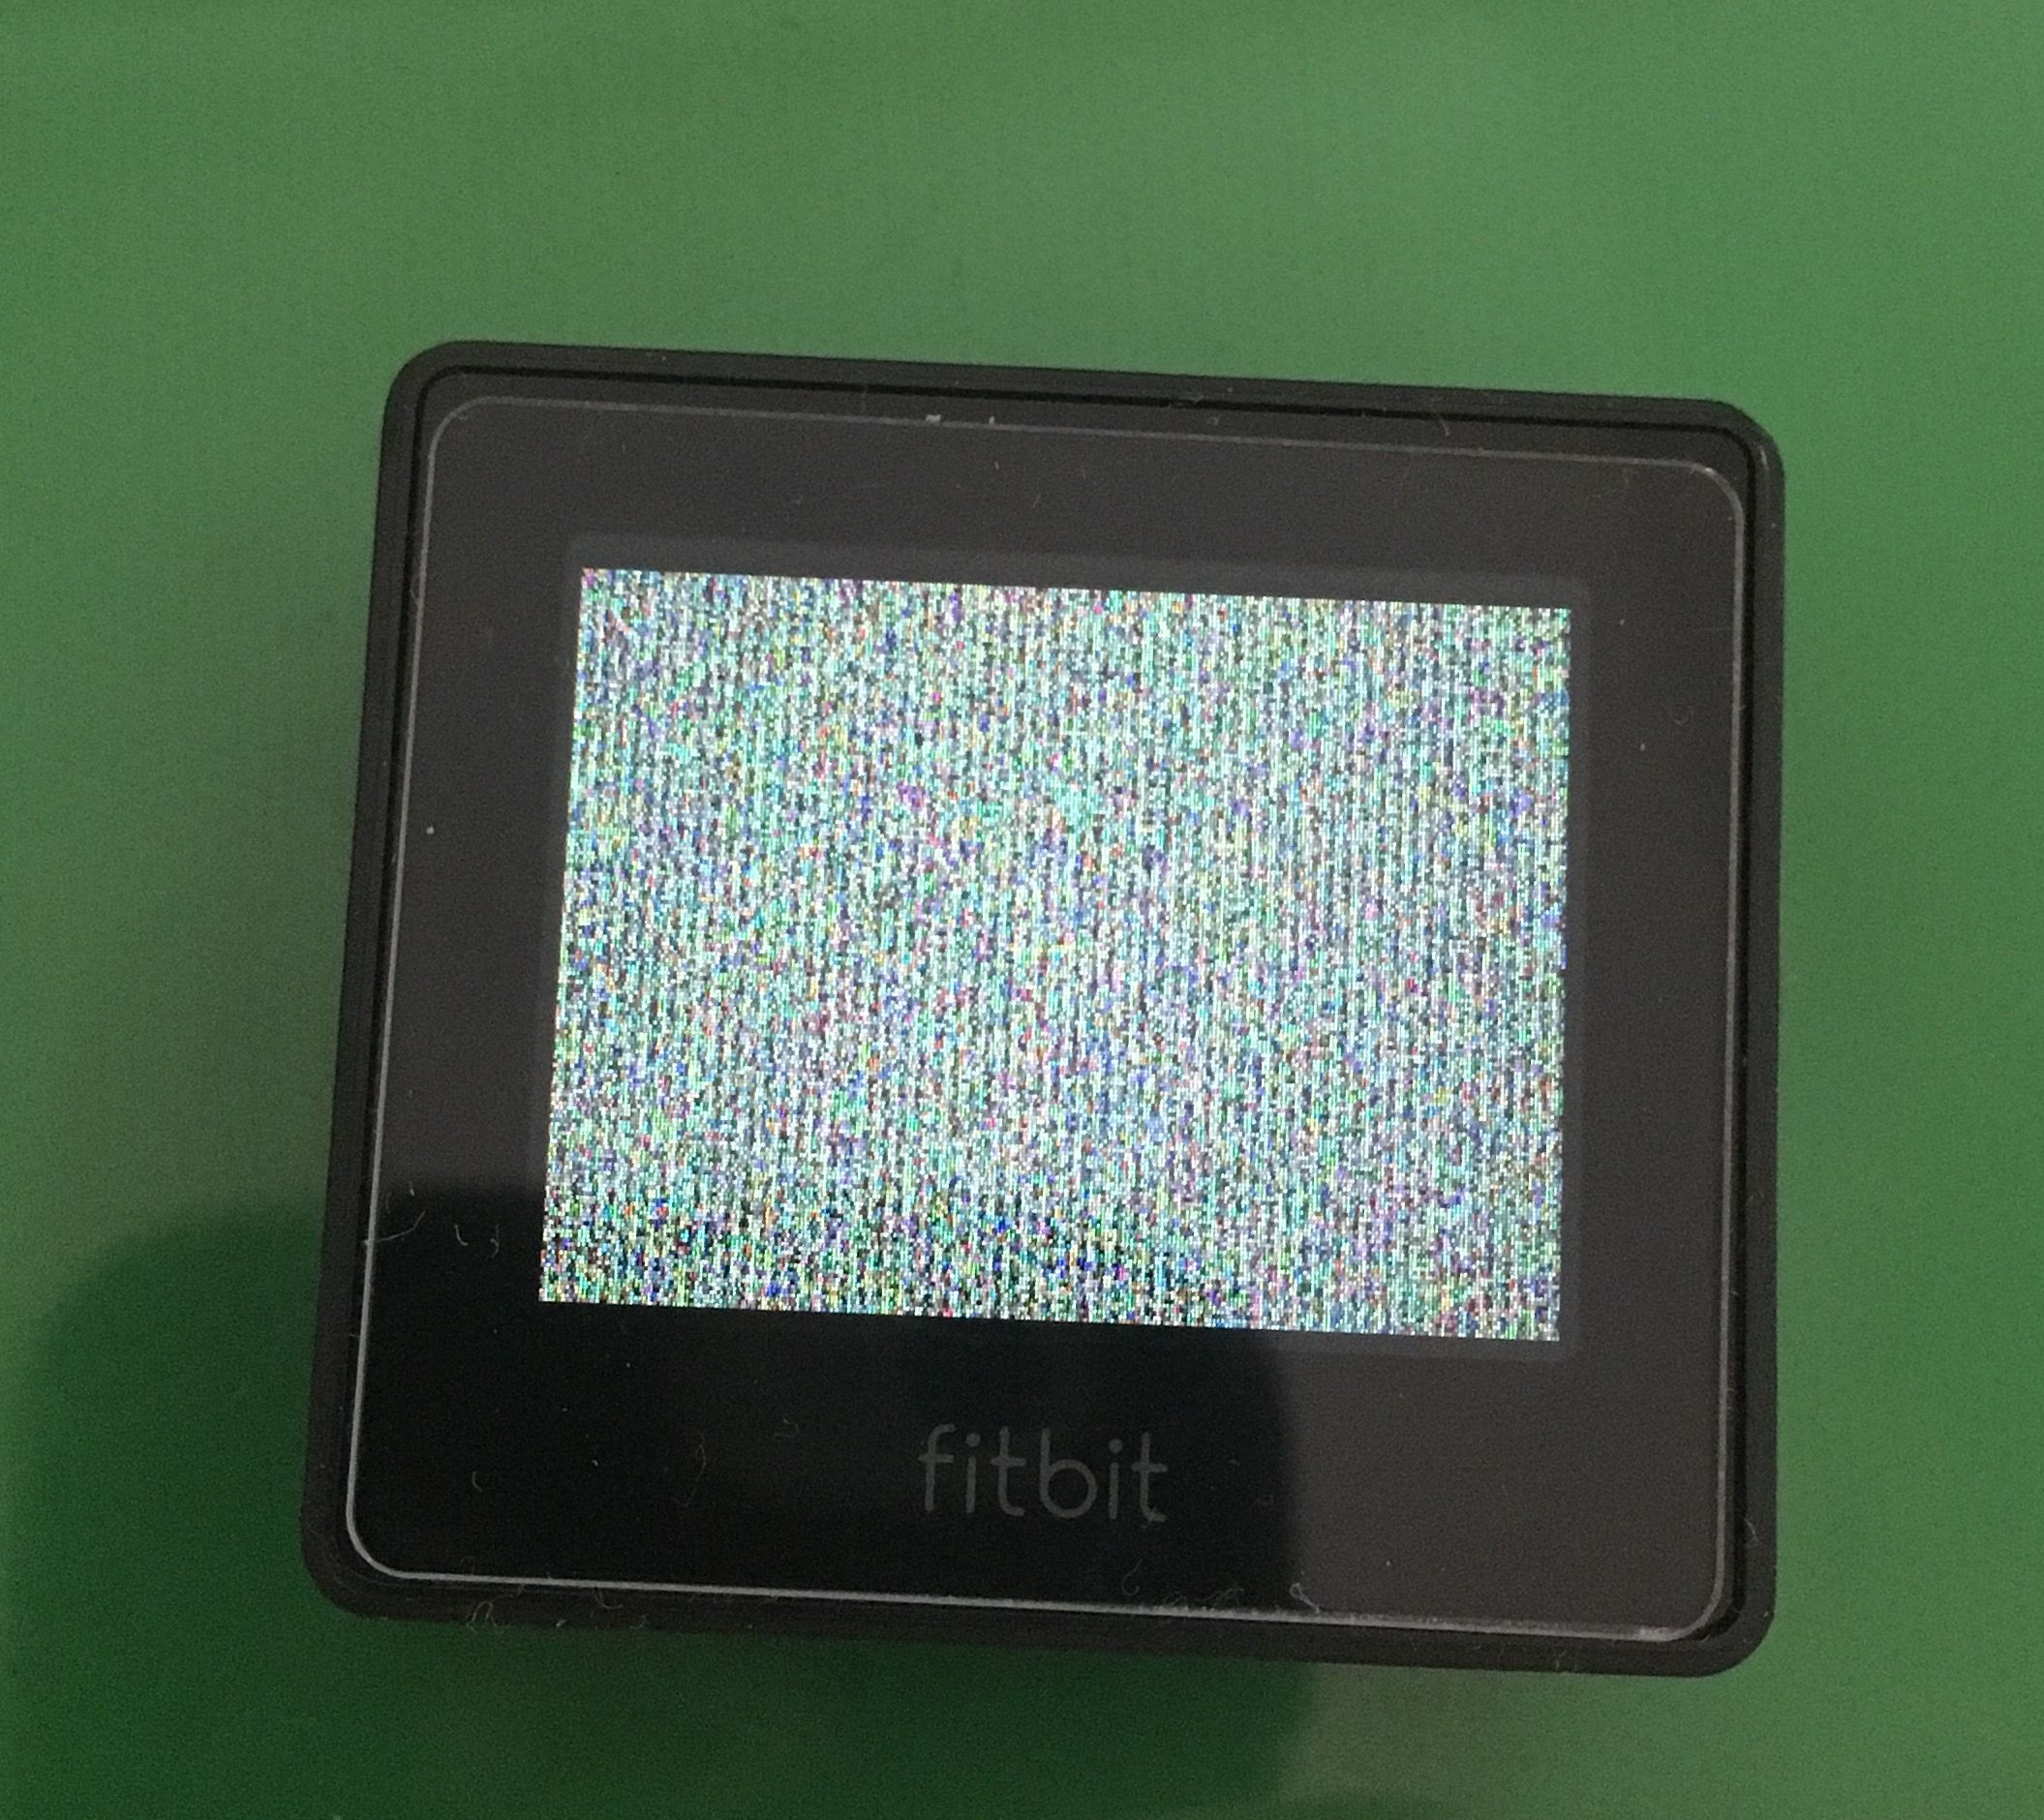 Blaze corrupted display - Fitbit Community